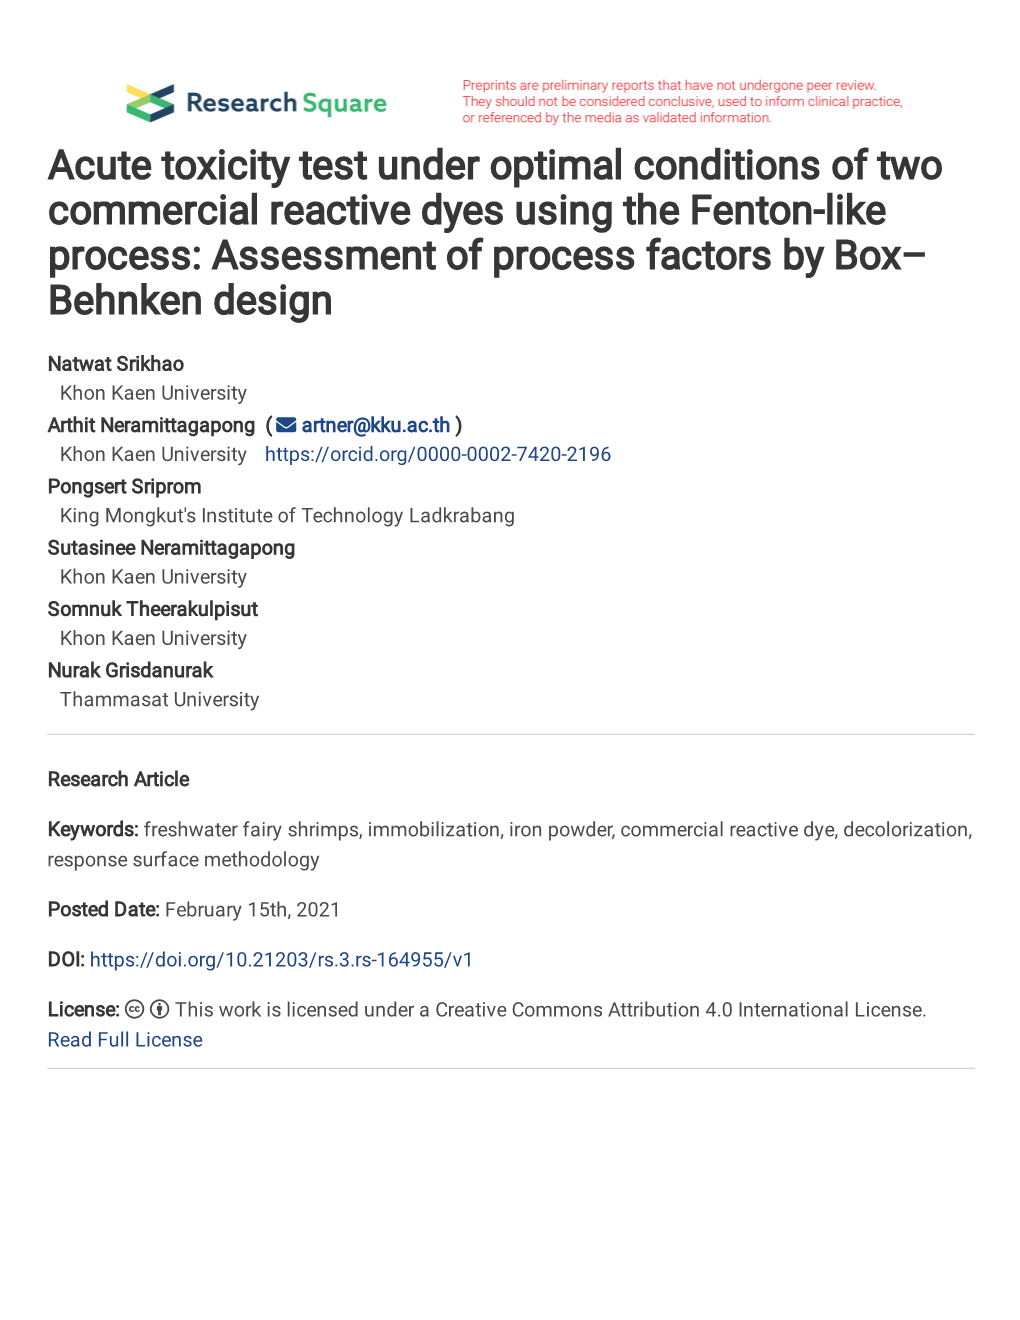 Acute Toxicity Test Under Optimal Conditions of Two Commercial Reactive Dyes Using the Fenton-Like Process: Assessment of Process Factors by Box– Behnken Design